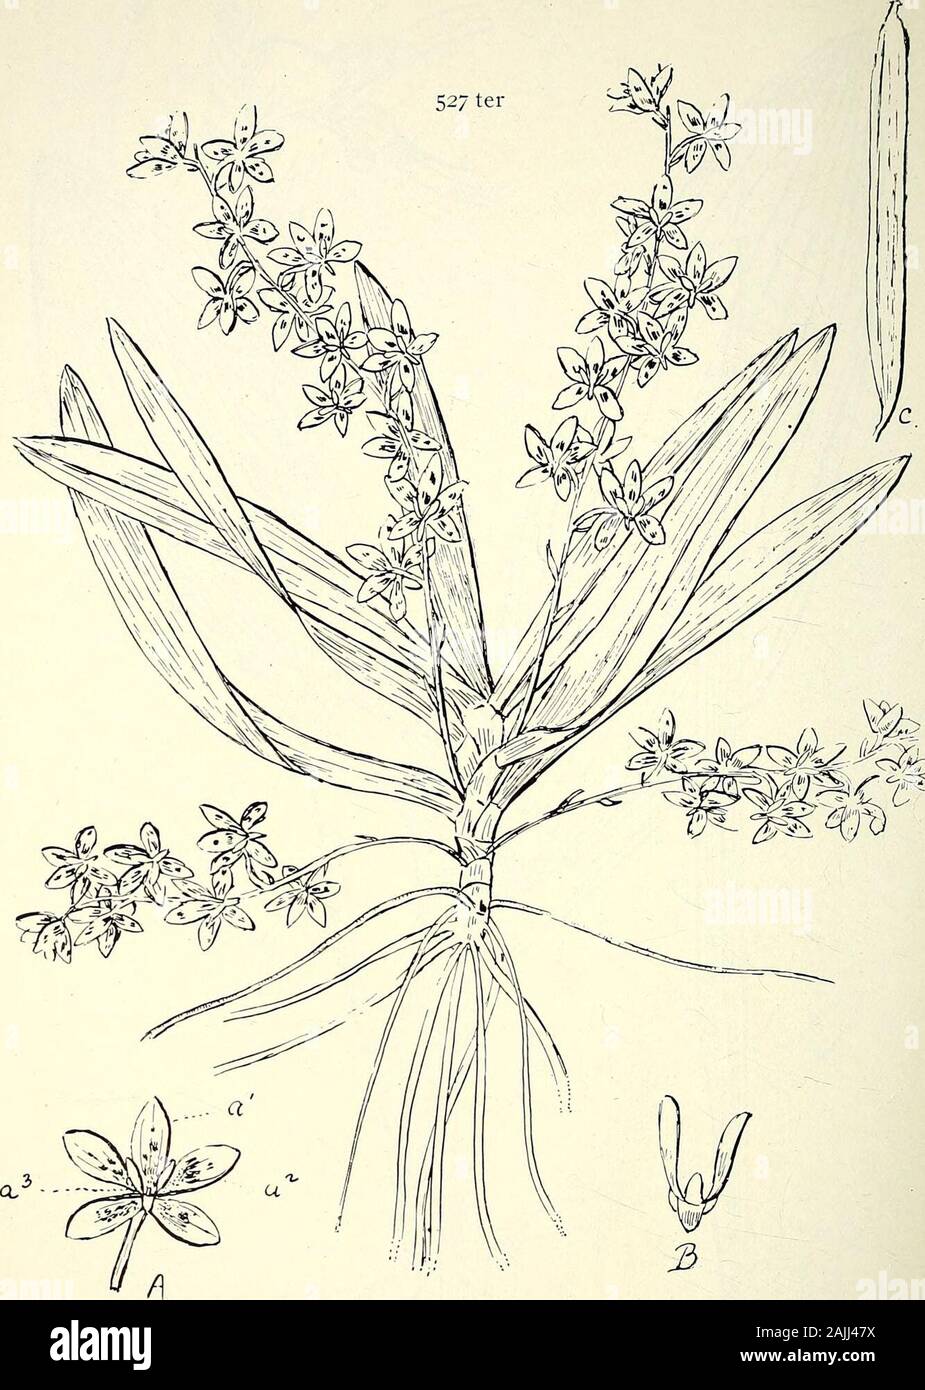 Comprehensive catalogue of Queensland plants, both indigenous and naturalised To which are added, where known, the aboriginal and other vernacular names; with numerous illustrations, and copious notes on the properties, features, &c., of the plants . C&ksdi 527. Sarcochilus platystachys, Bail. 534 CXXVII. ORCHIDE^.. C. t wA,/-& 527 ter. Sarcochilus Weinthalii, Bail. (A) Flower, enl., (ai) dorsal sepal, (a.2) petals, (a3) labellum, (B) labellum, enl.(C) capsule, nat. size. CXXVII. ORCHIDE^. 535 Tribe II.—Vande^z. Subtribe I.—Eulophiece.Eulophia, R. Br. venosa, Reichb. = Dipodium venosuin, F. v. Stock Photo